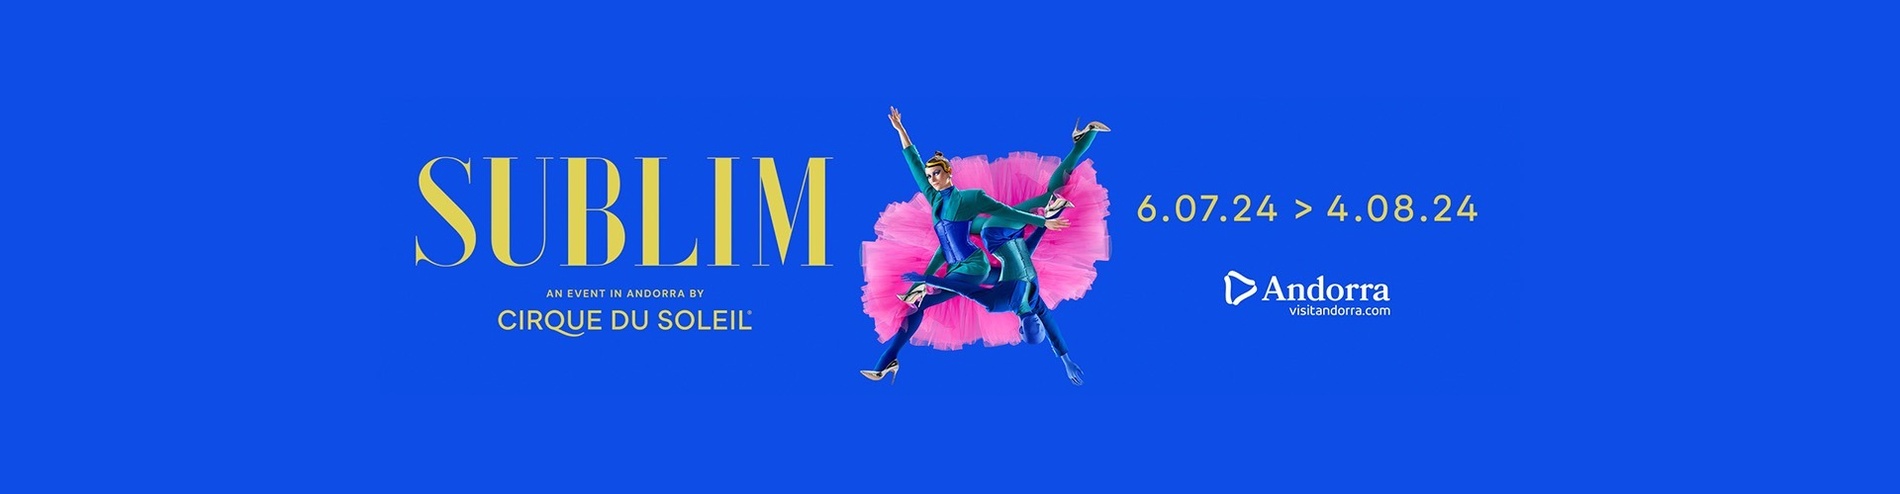 a poster for sublim an event in andorra by cirque du soleil